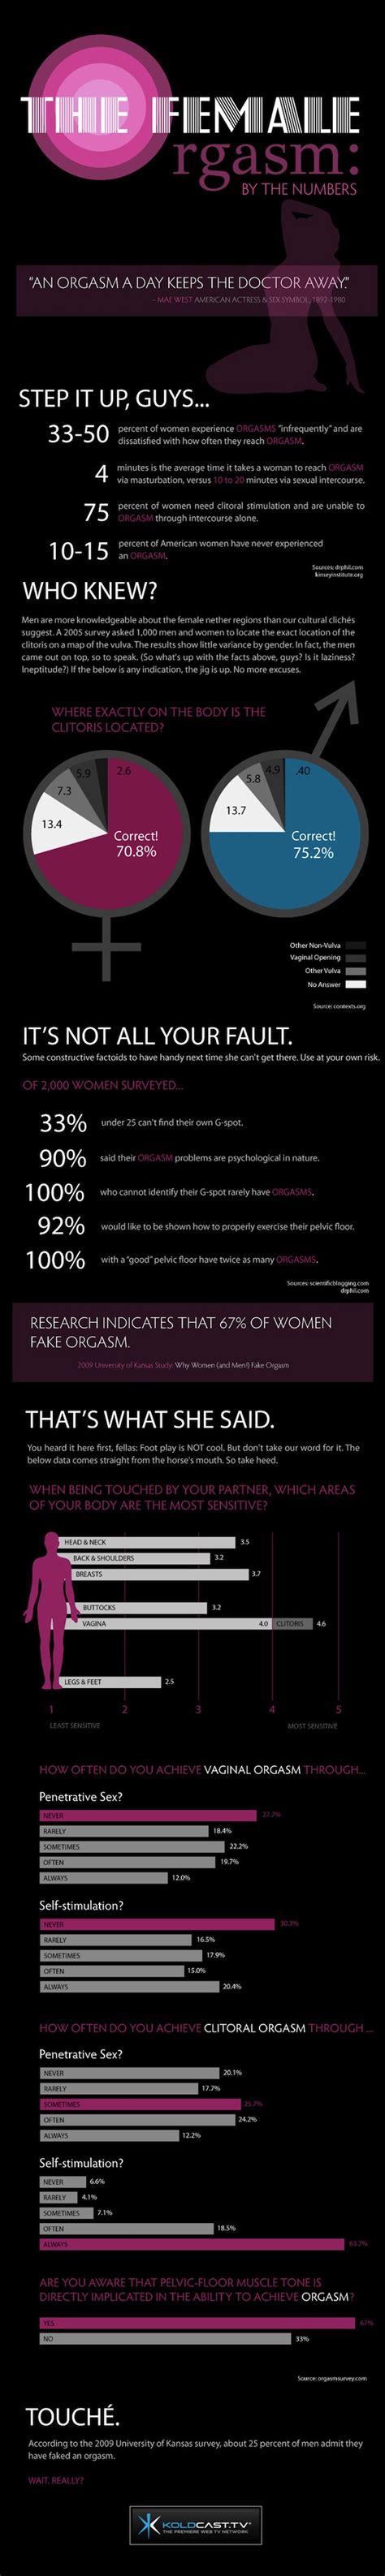 Infographic Of The Day The Female Orgasm By The Numbers [sfw]